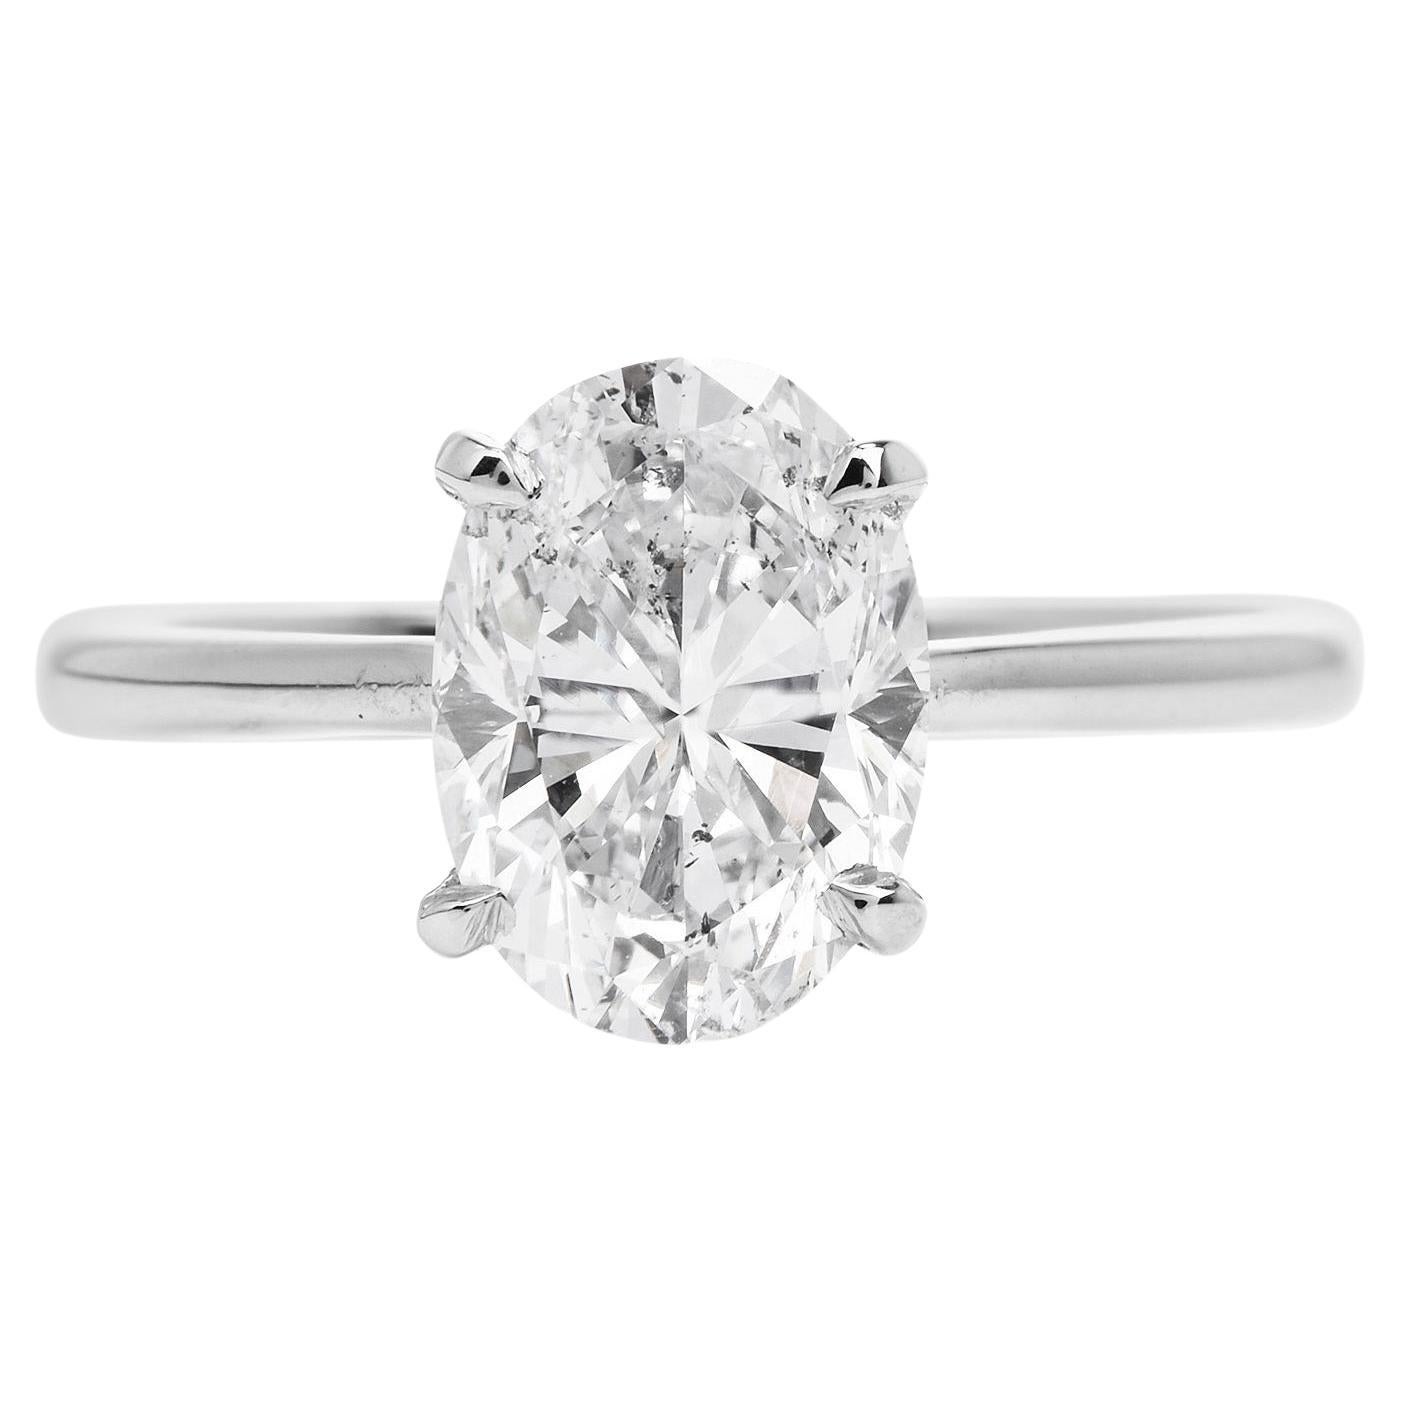 A Highly desired classic Engagement Ring!

this wide GIA-certified Diamond ring is perfect for a spectacular engagement proposal.

Crafted in solid 14K White gold, the center is adorned by an Icy With GIA Certified Oval Cut, prong-set, a genuine